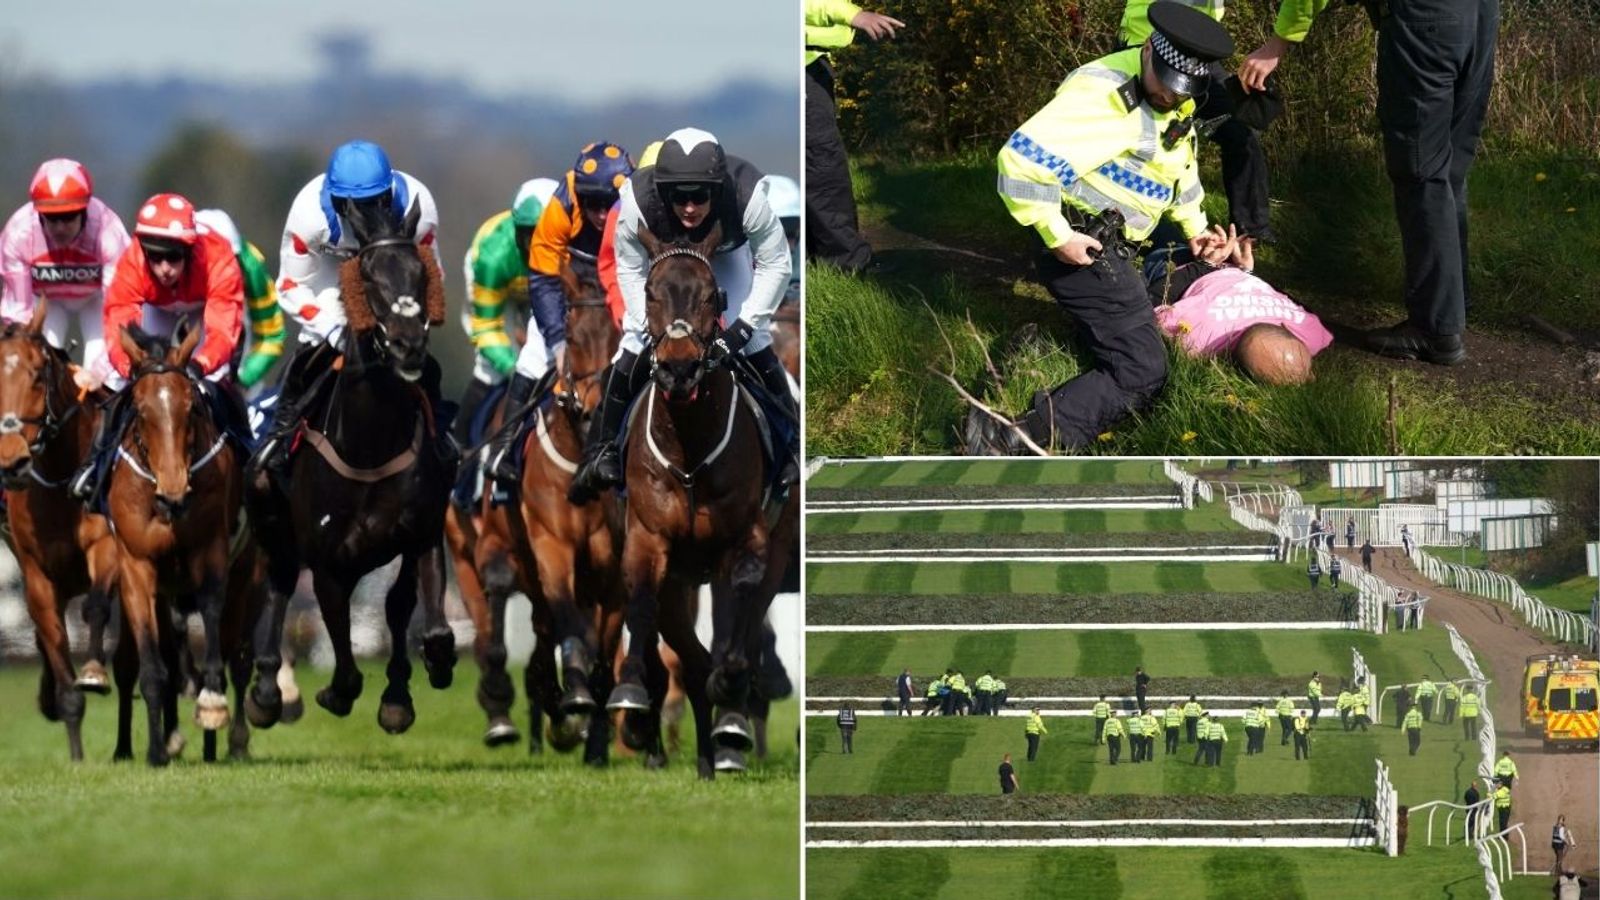 Grand National 'a disgrace': Animal rights groups call for jump racing ban after three horses die at Aintree